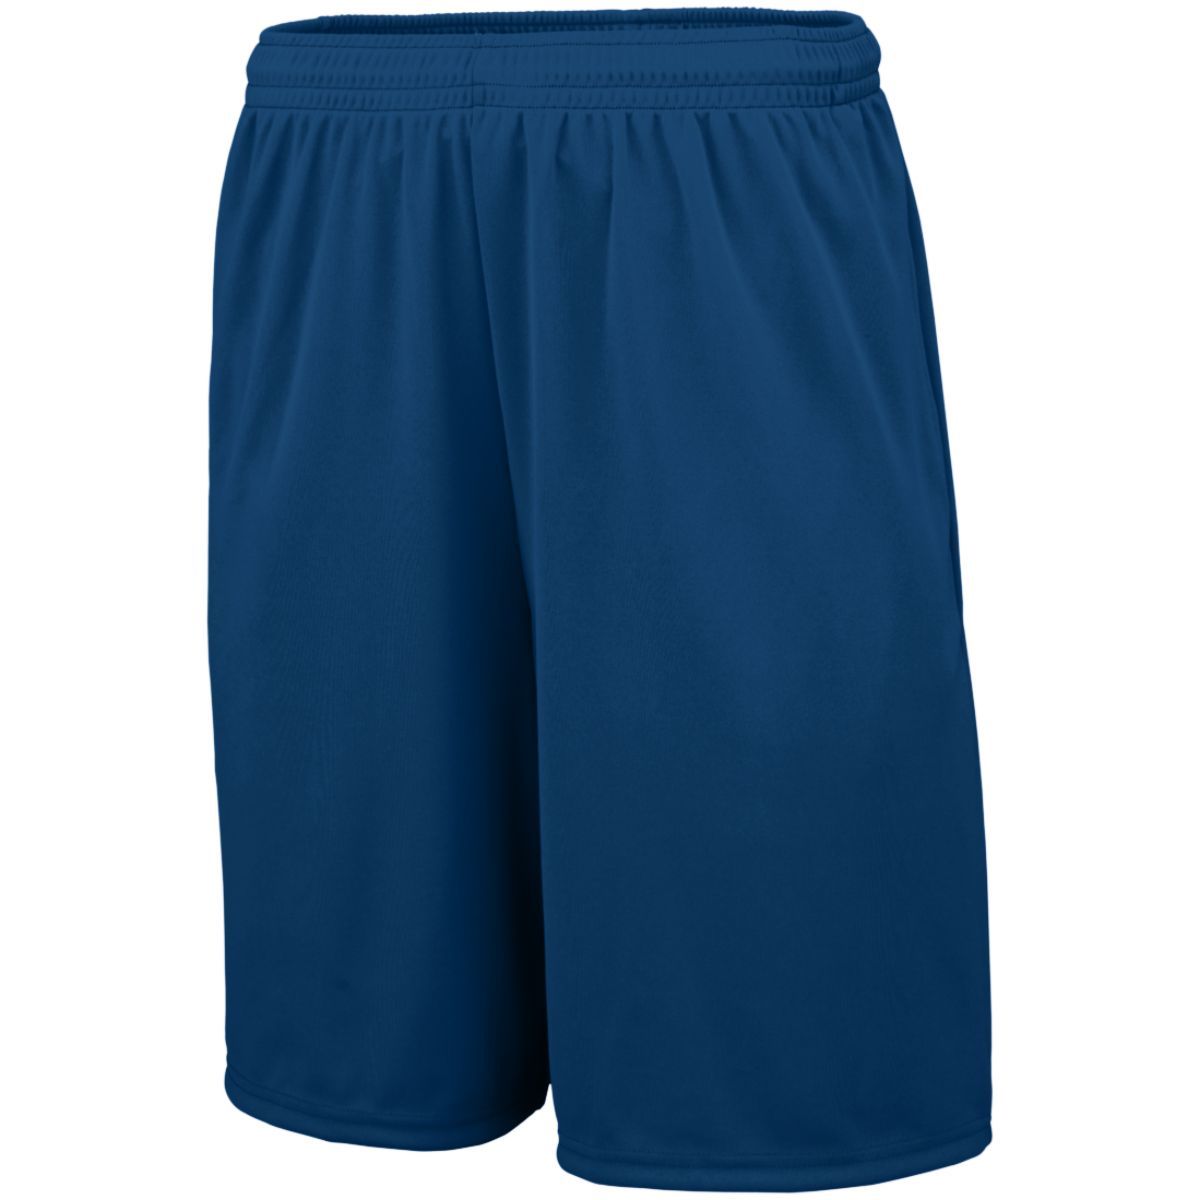 Youth Training Shorts With Pockets 1429